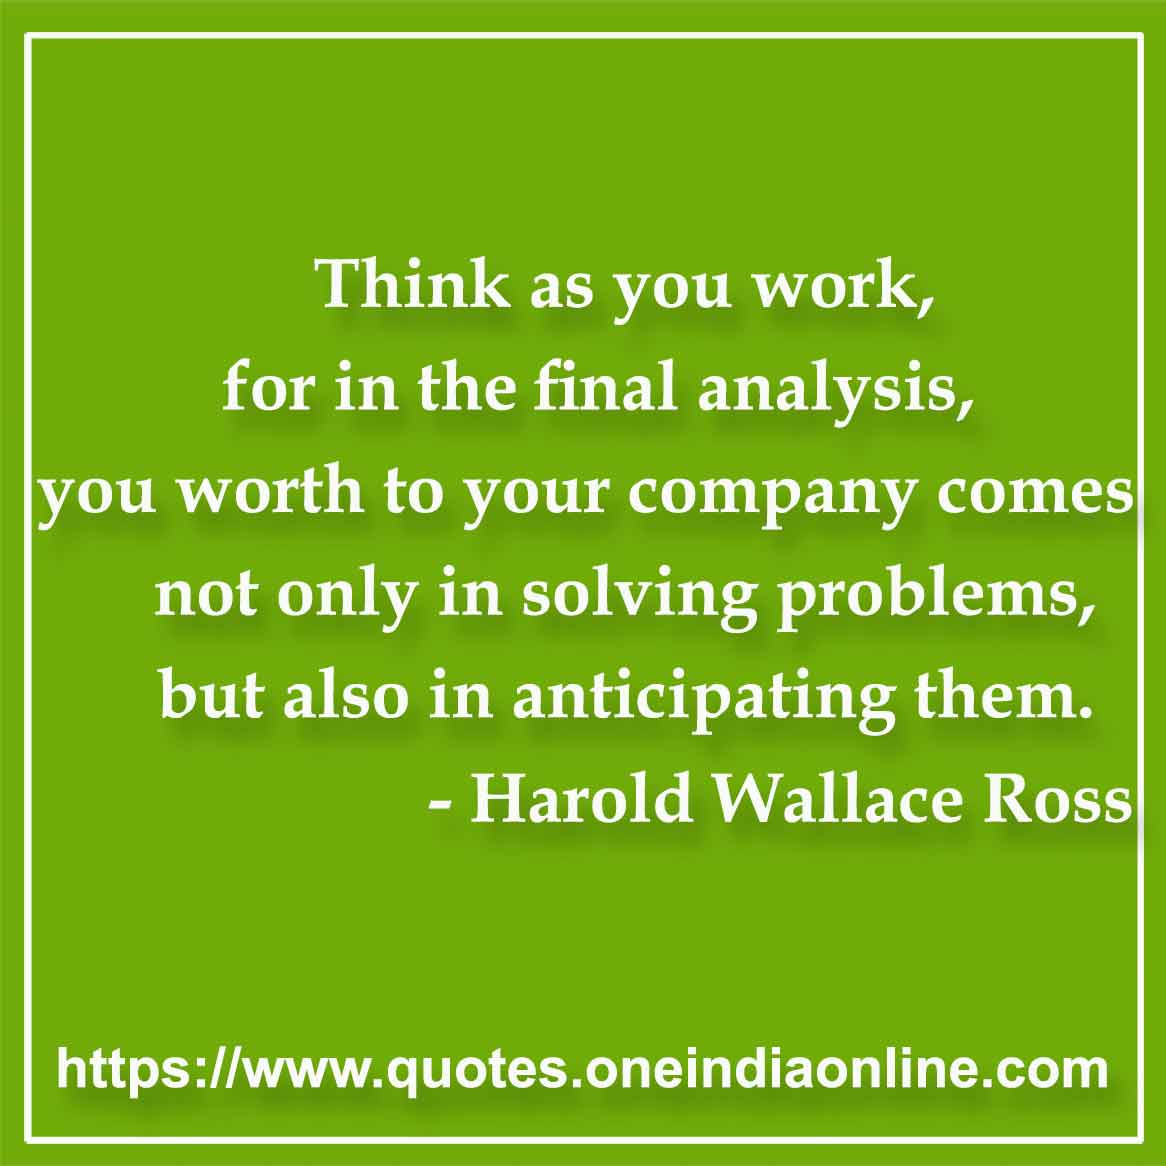 Think as you work, for in the final analysis, you worth to your company comes not only in solving problems, but also in anticipating them.

- Harold Wallace Ross Quotes